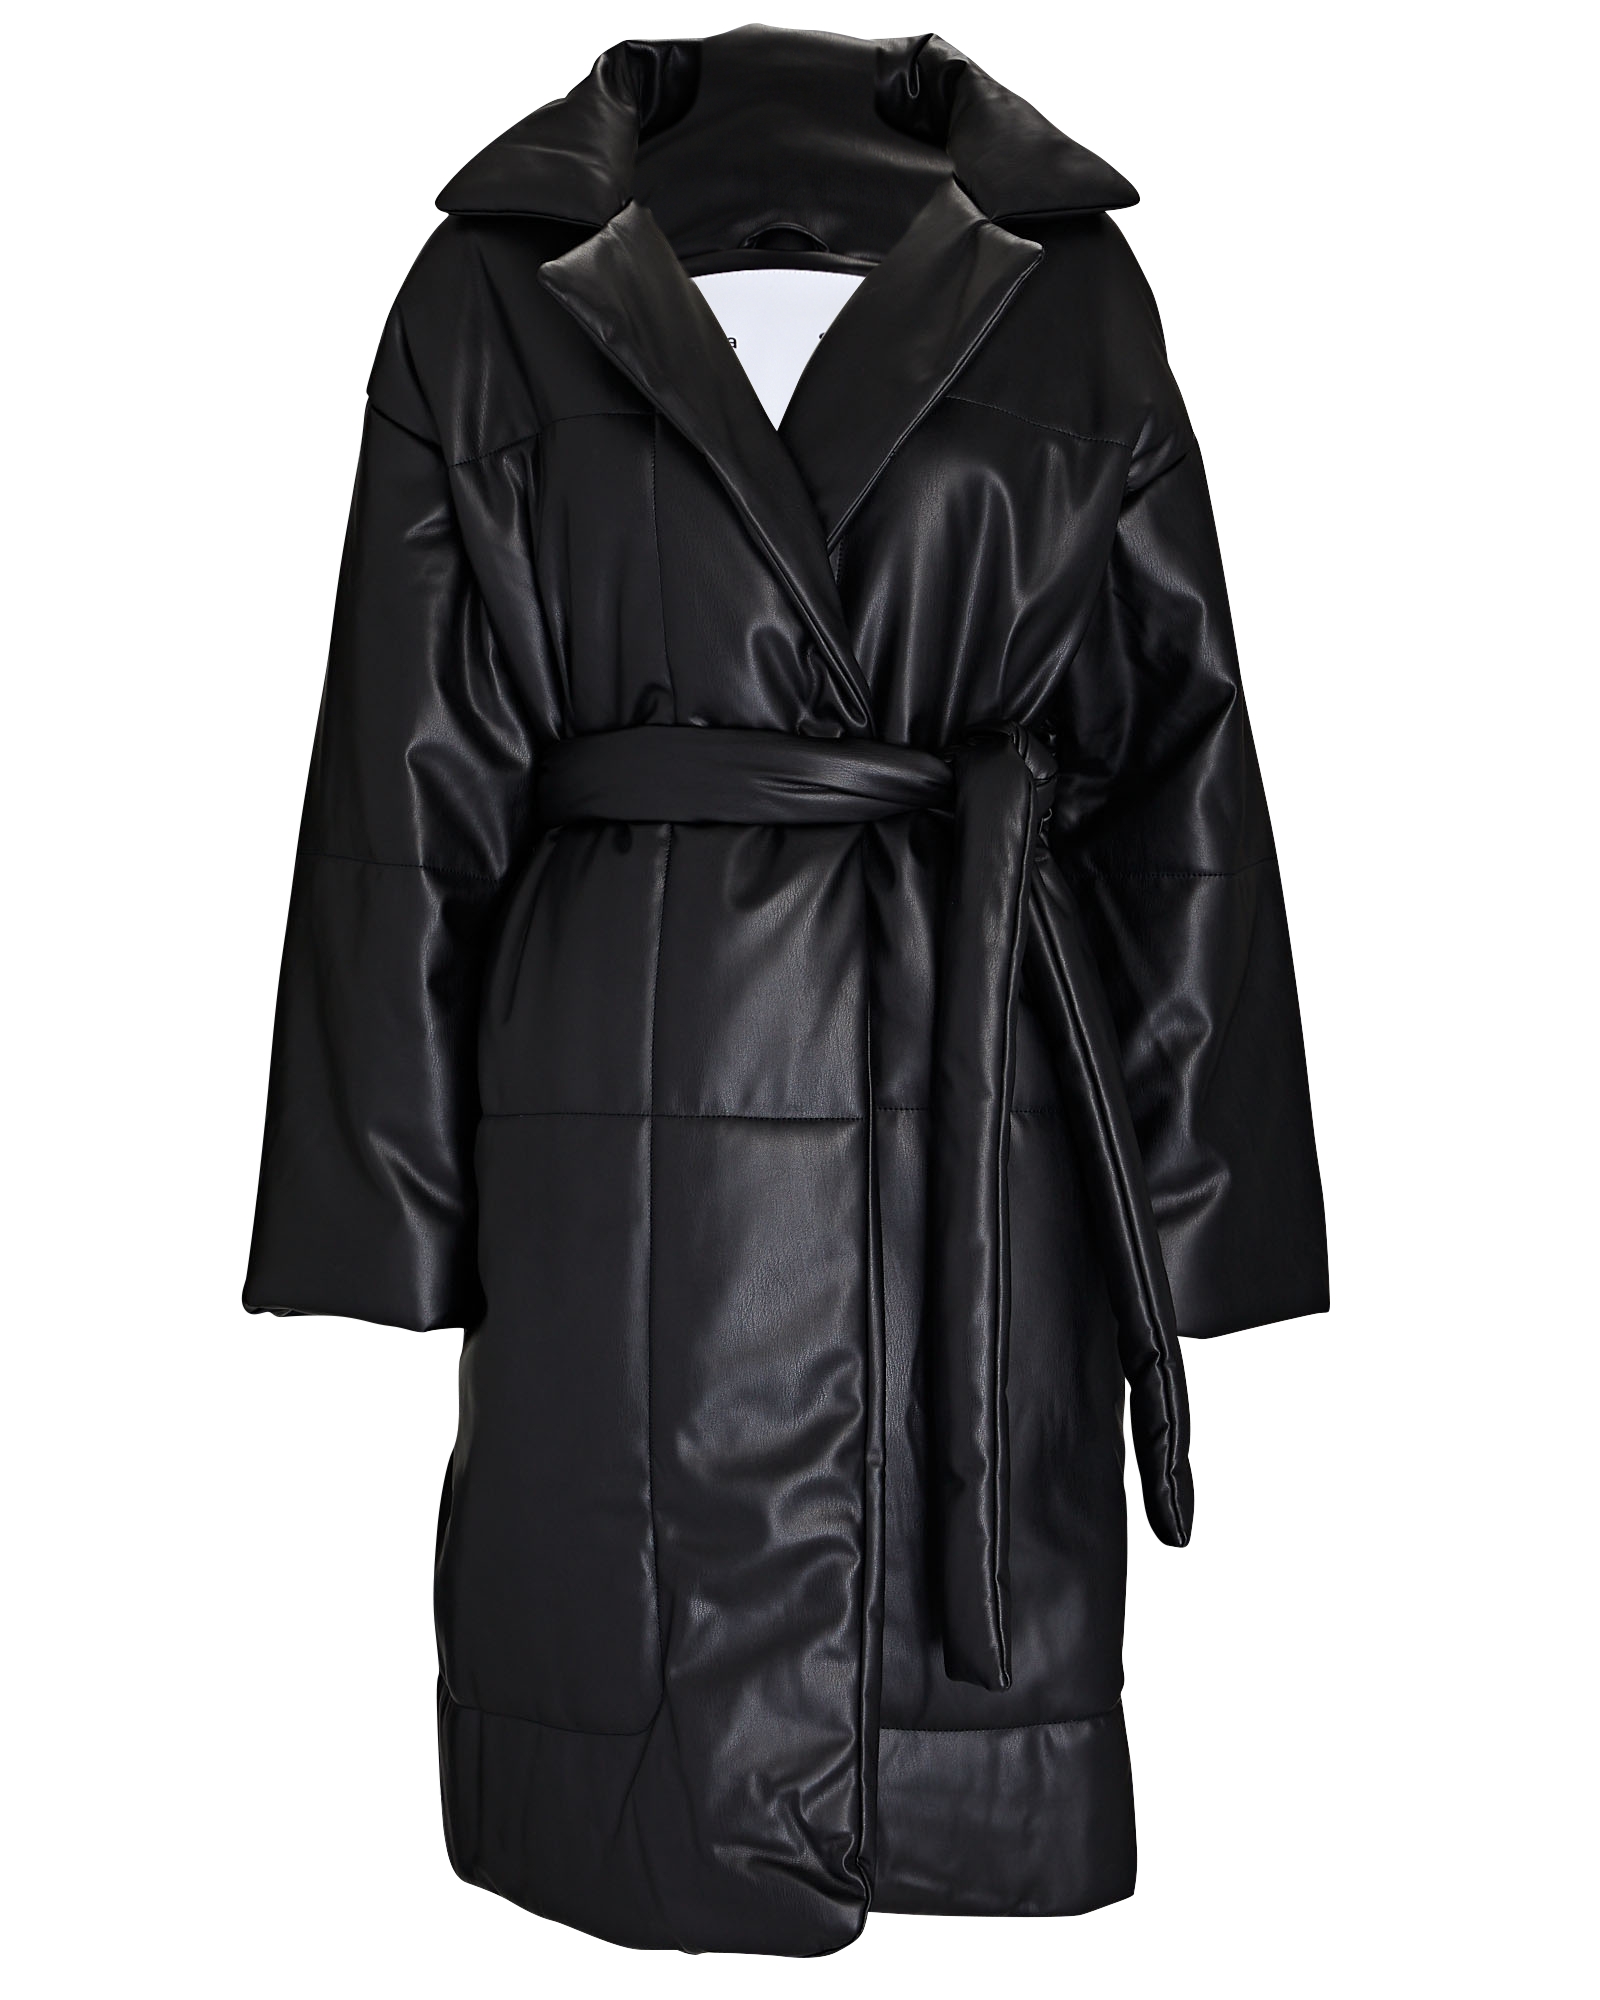 Proenza Schouler White Label Quilted Vegan Leather Puffer Coat in black ...